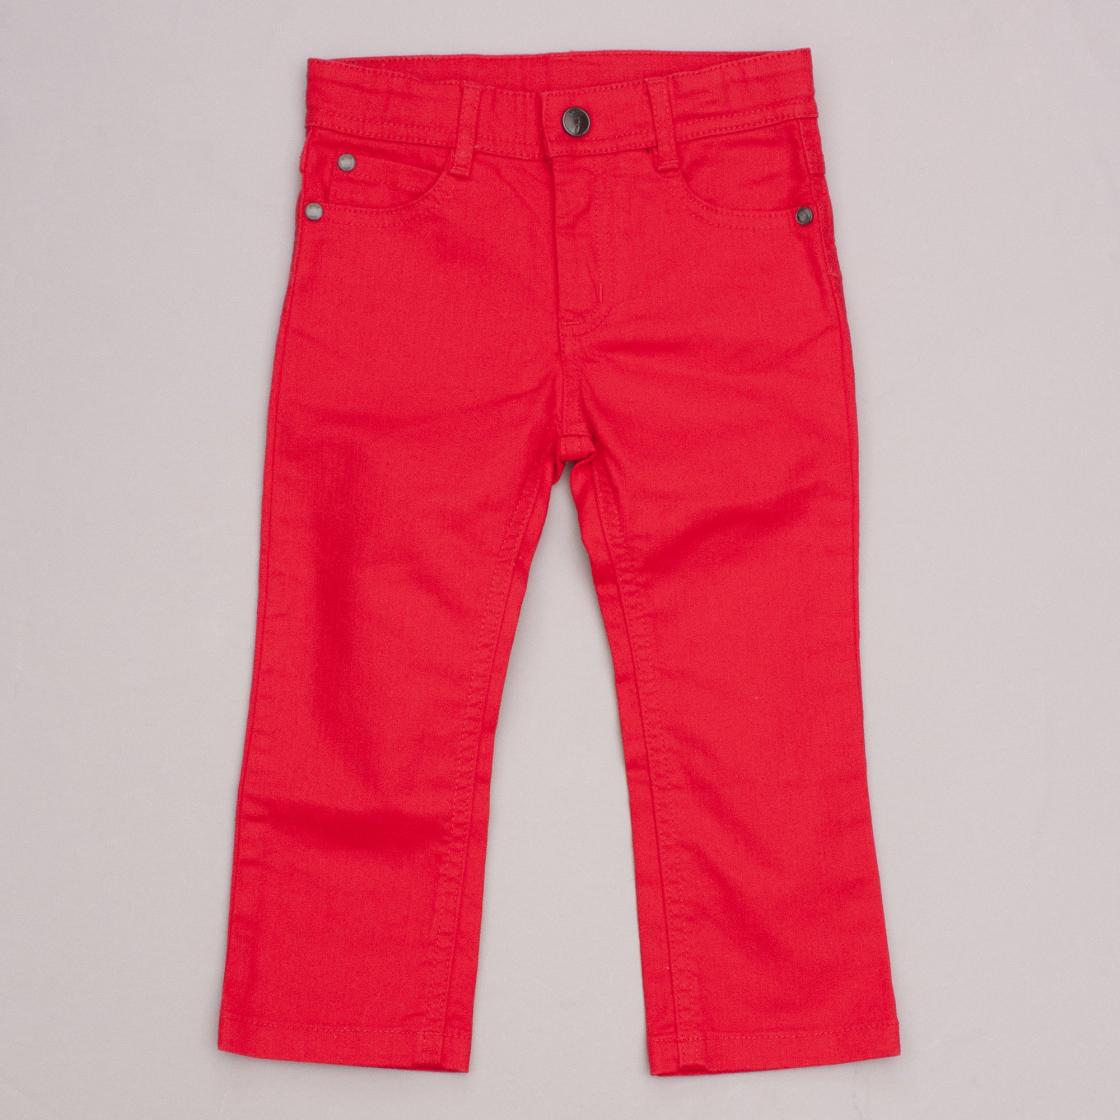 Jacadi Red Jeans "Brand New"